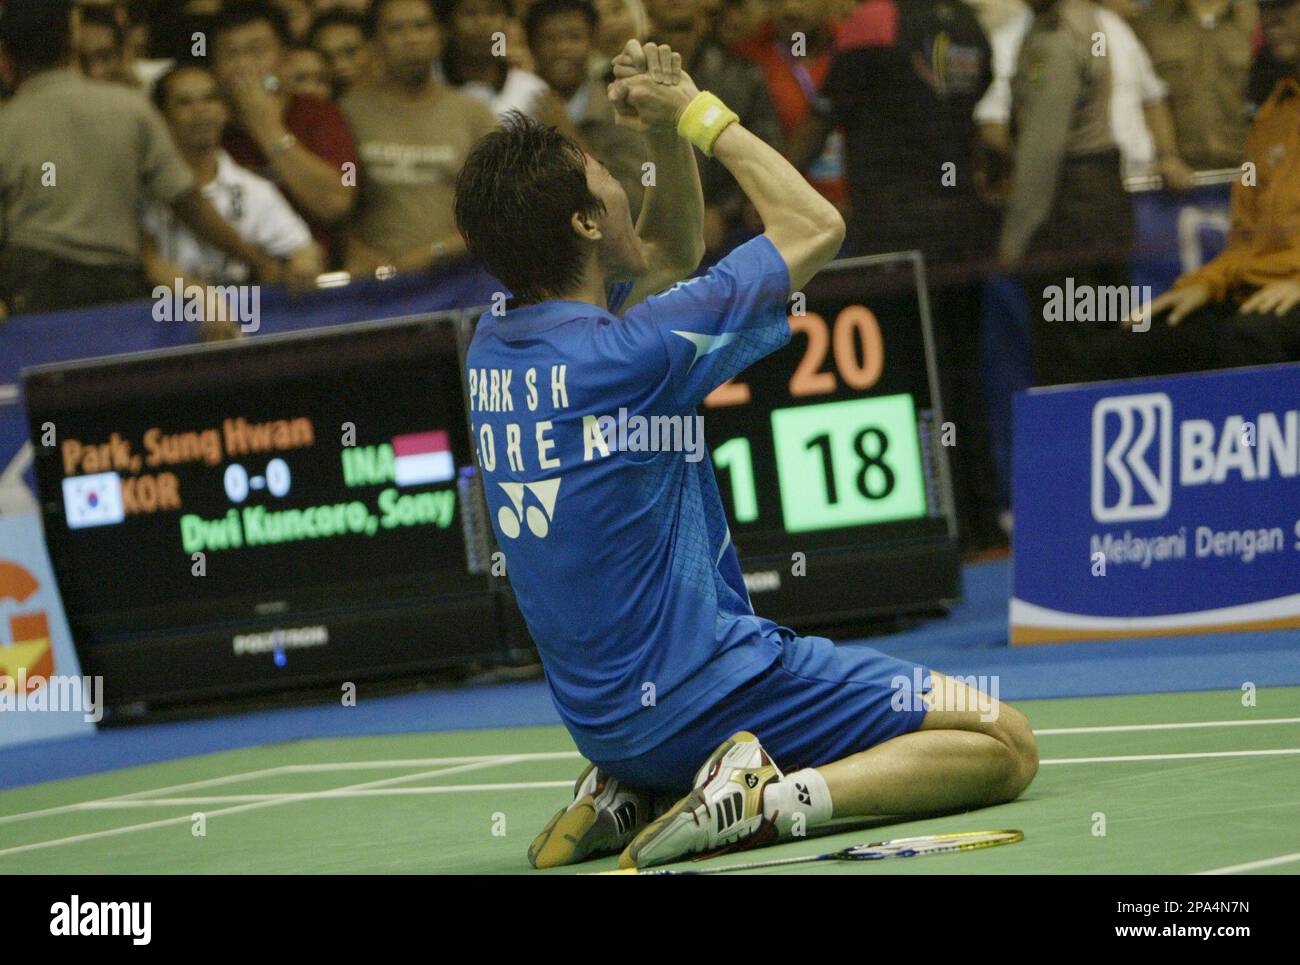 South Korean Park Sung Hwan reacts after defeating Sony Dwi Kuncoro of Indonesia during their semi final at the Thomas Cup badminton championship match at Istora Senayan stadium in Jakarta, Indonesia, Friday,